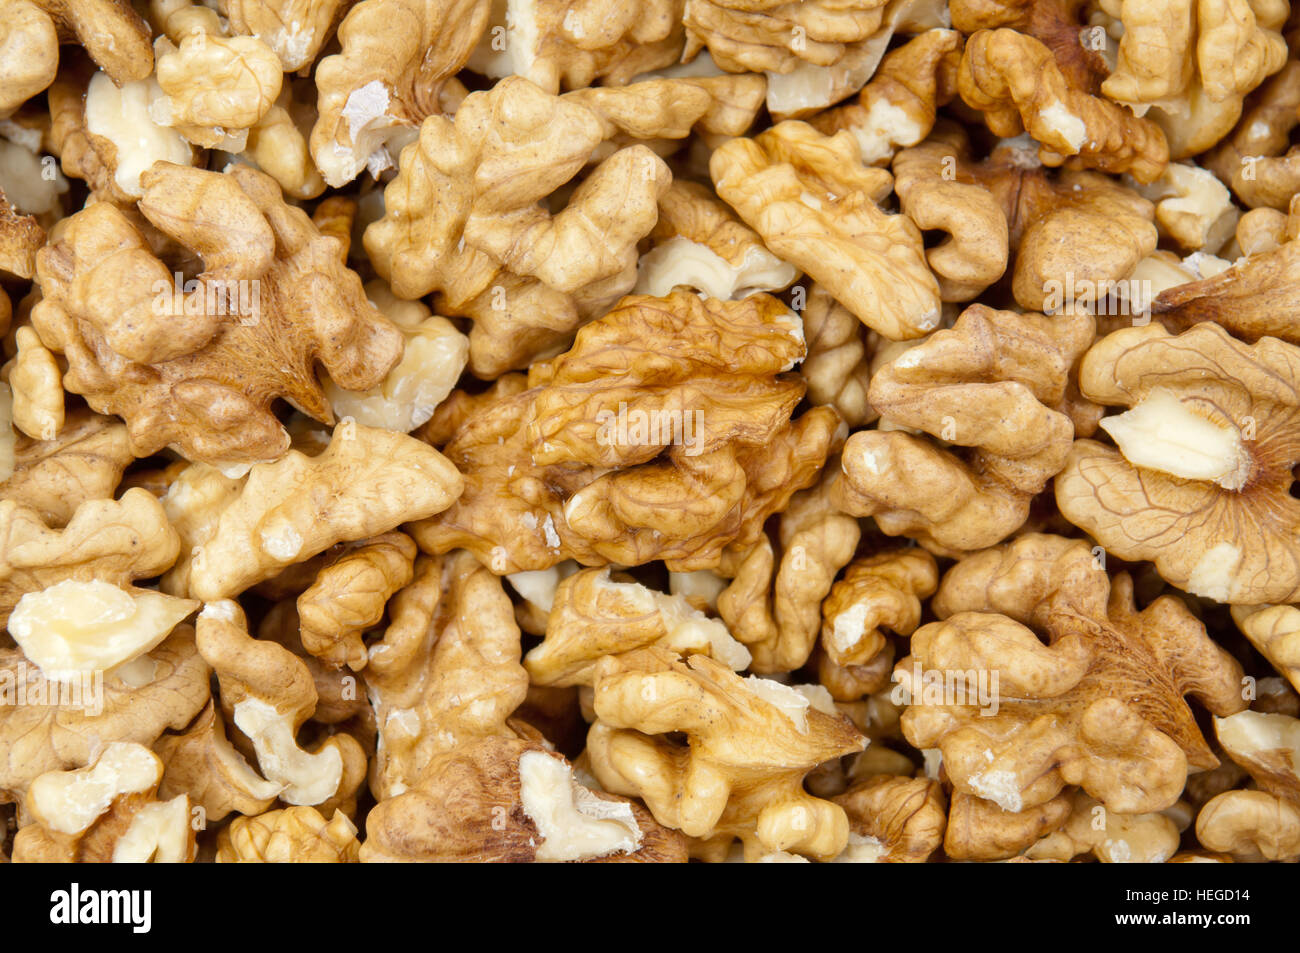 Shelled walnuts pile as background Stock Photo